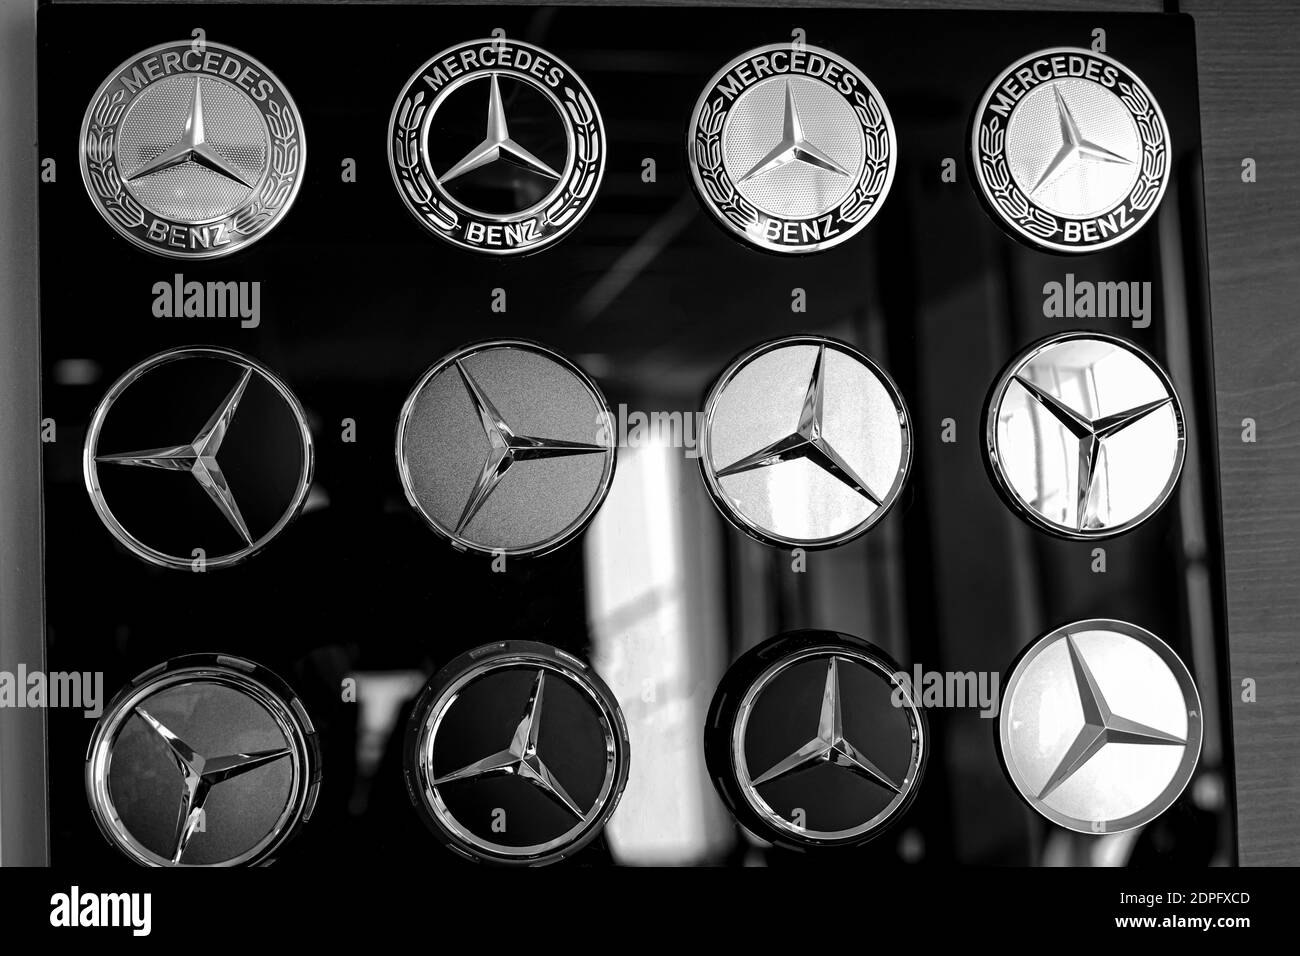 Antibes, France 19.11.2020 Mercedes Benz Sign Collection Close Up. Founded  in 1926 is a German luxury automobile manufacturer. High quality photo  Stock Photo - Alamy